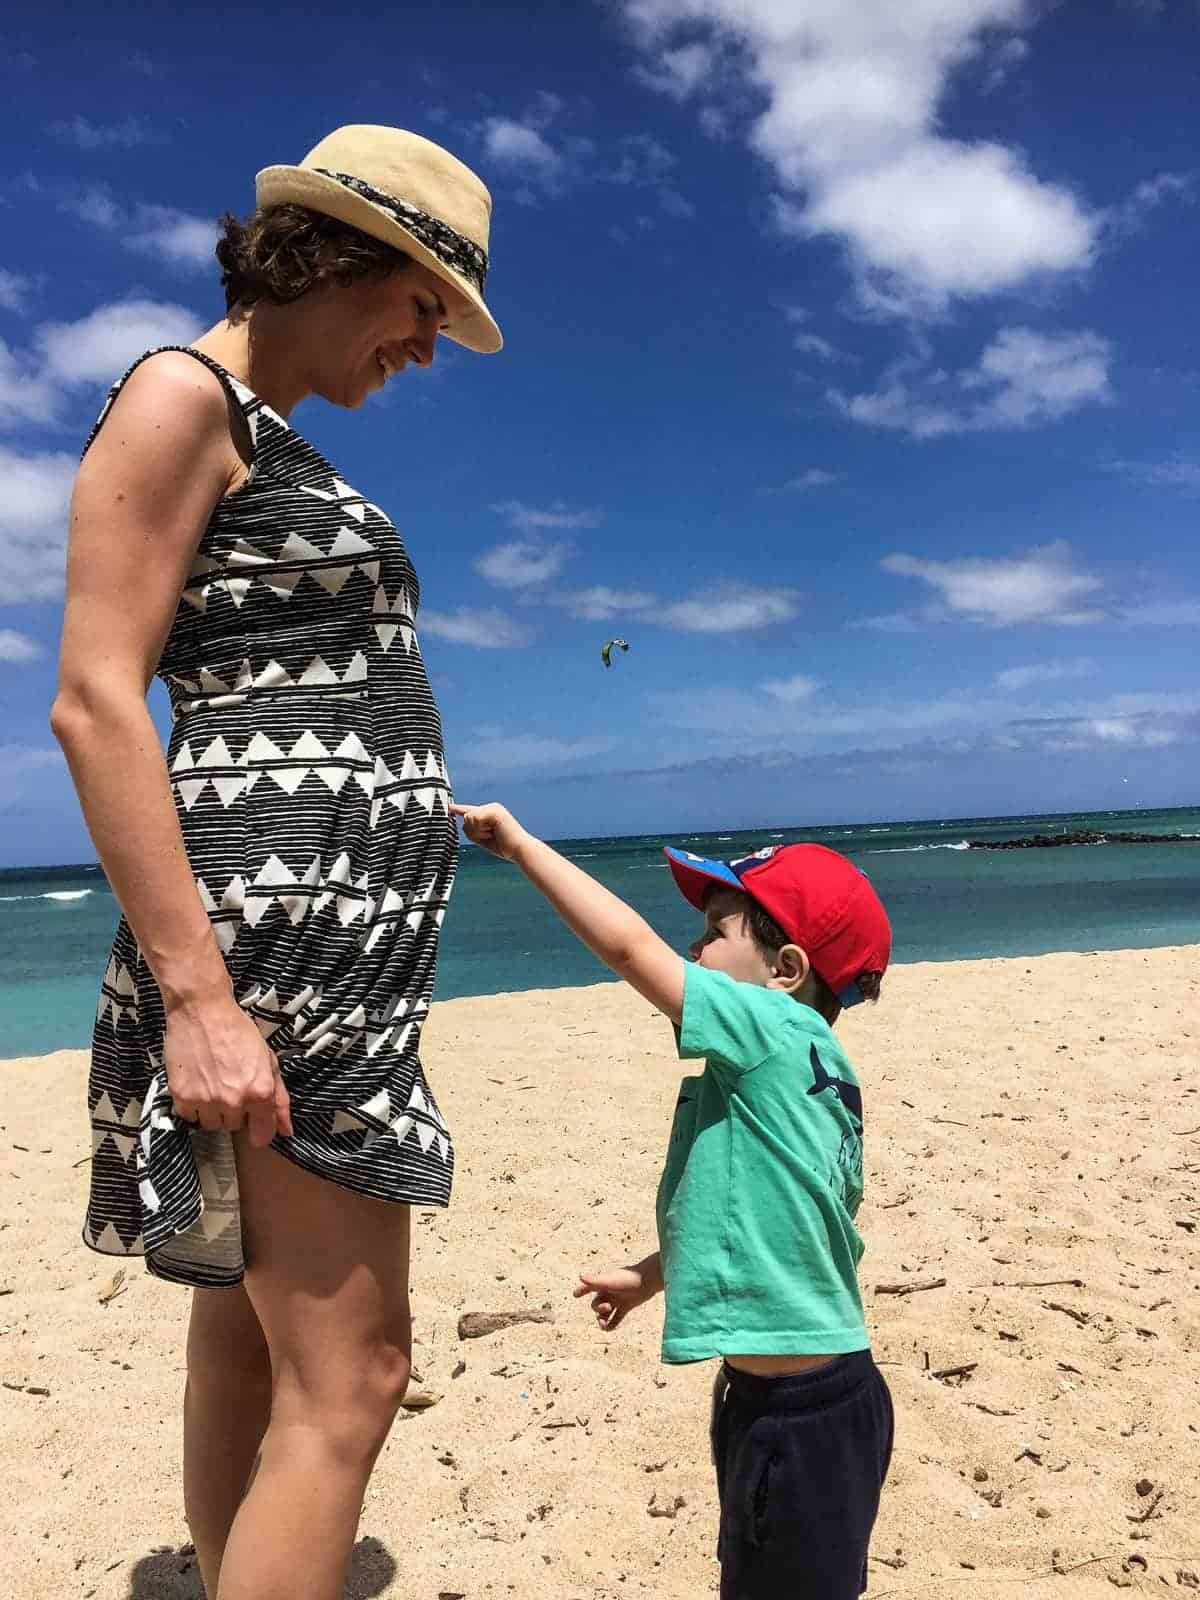 Denise on the beach with a little boy pointing at her stomach